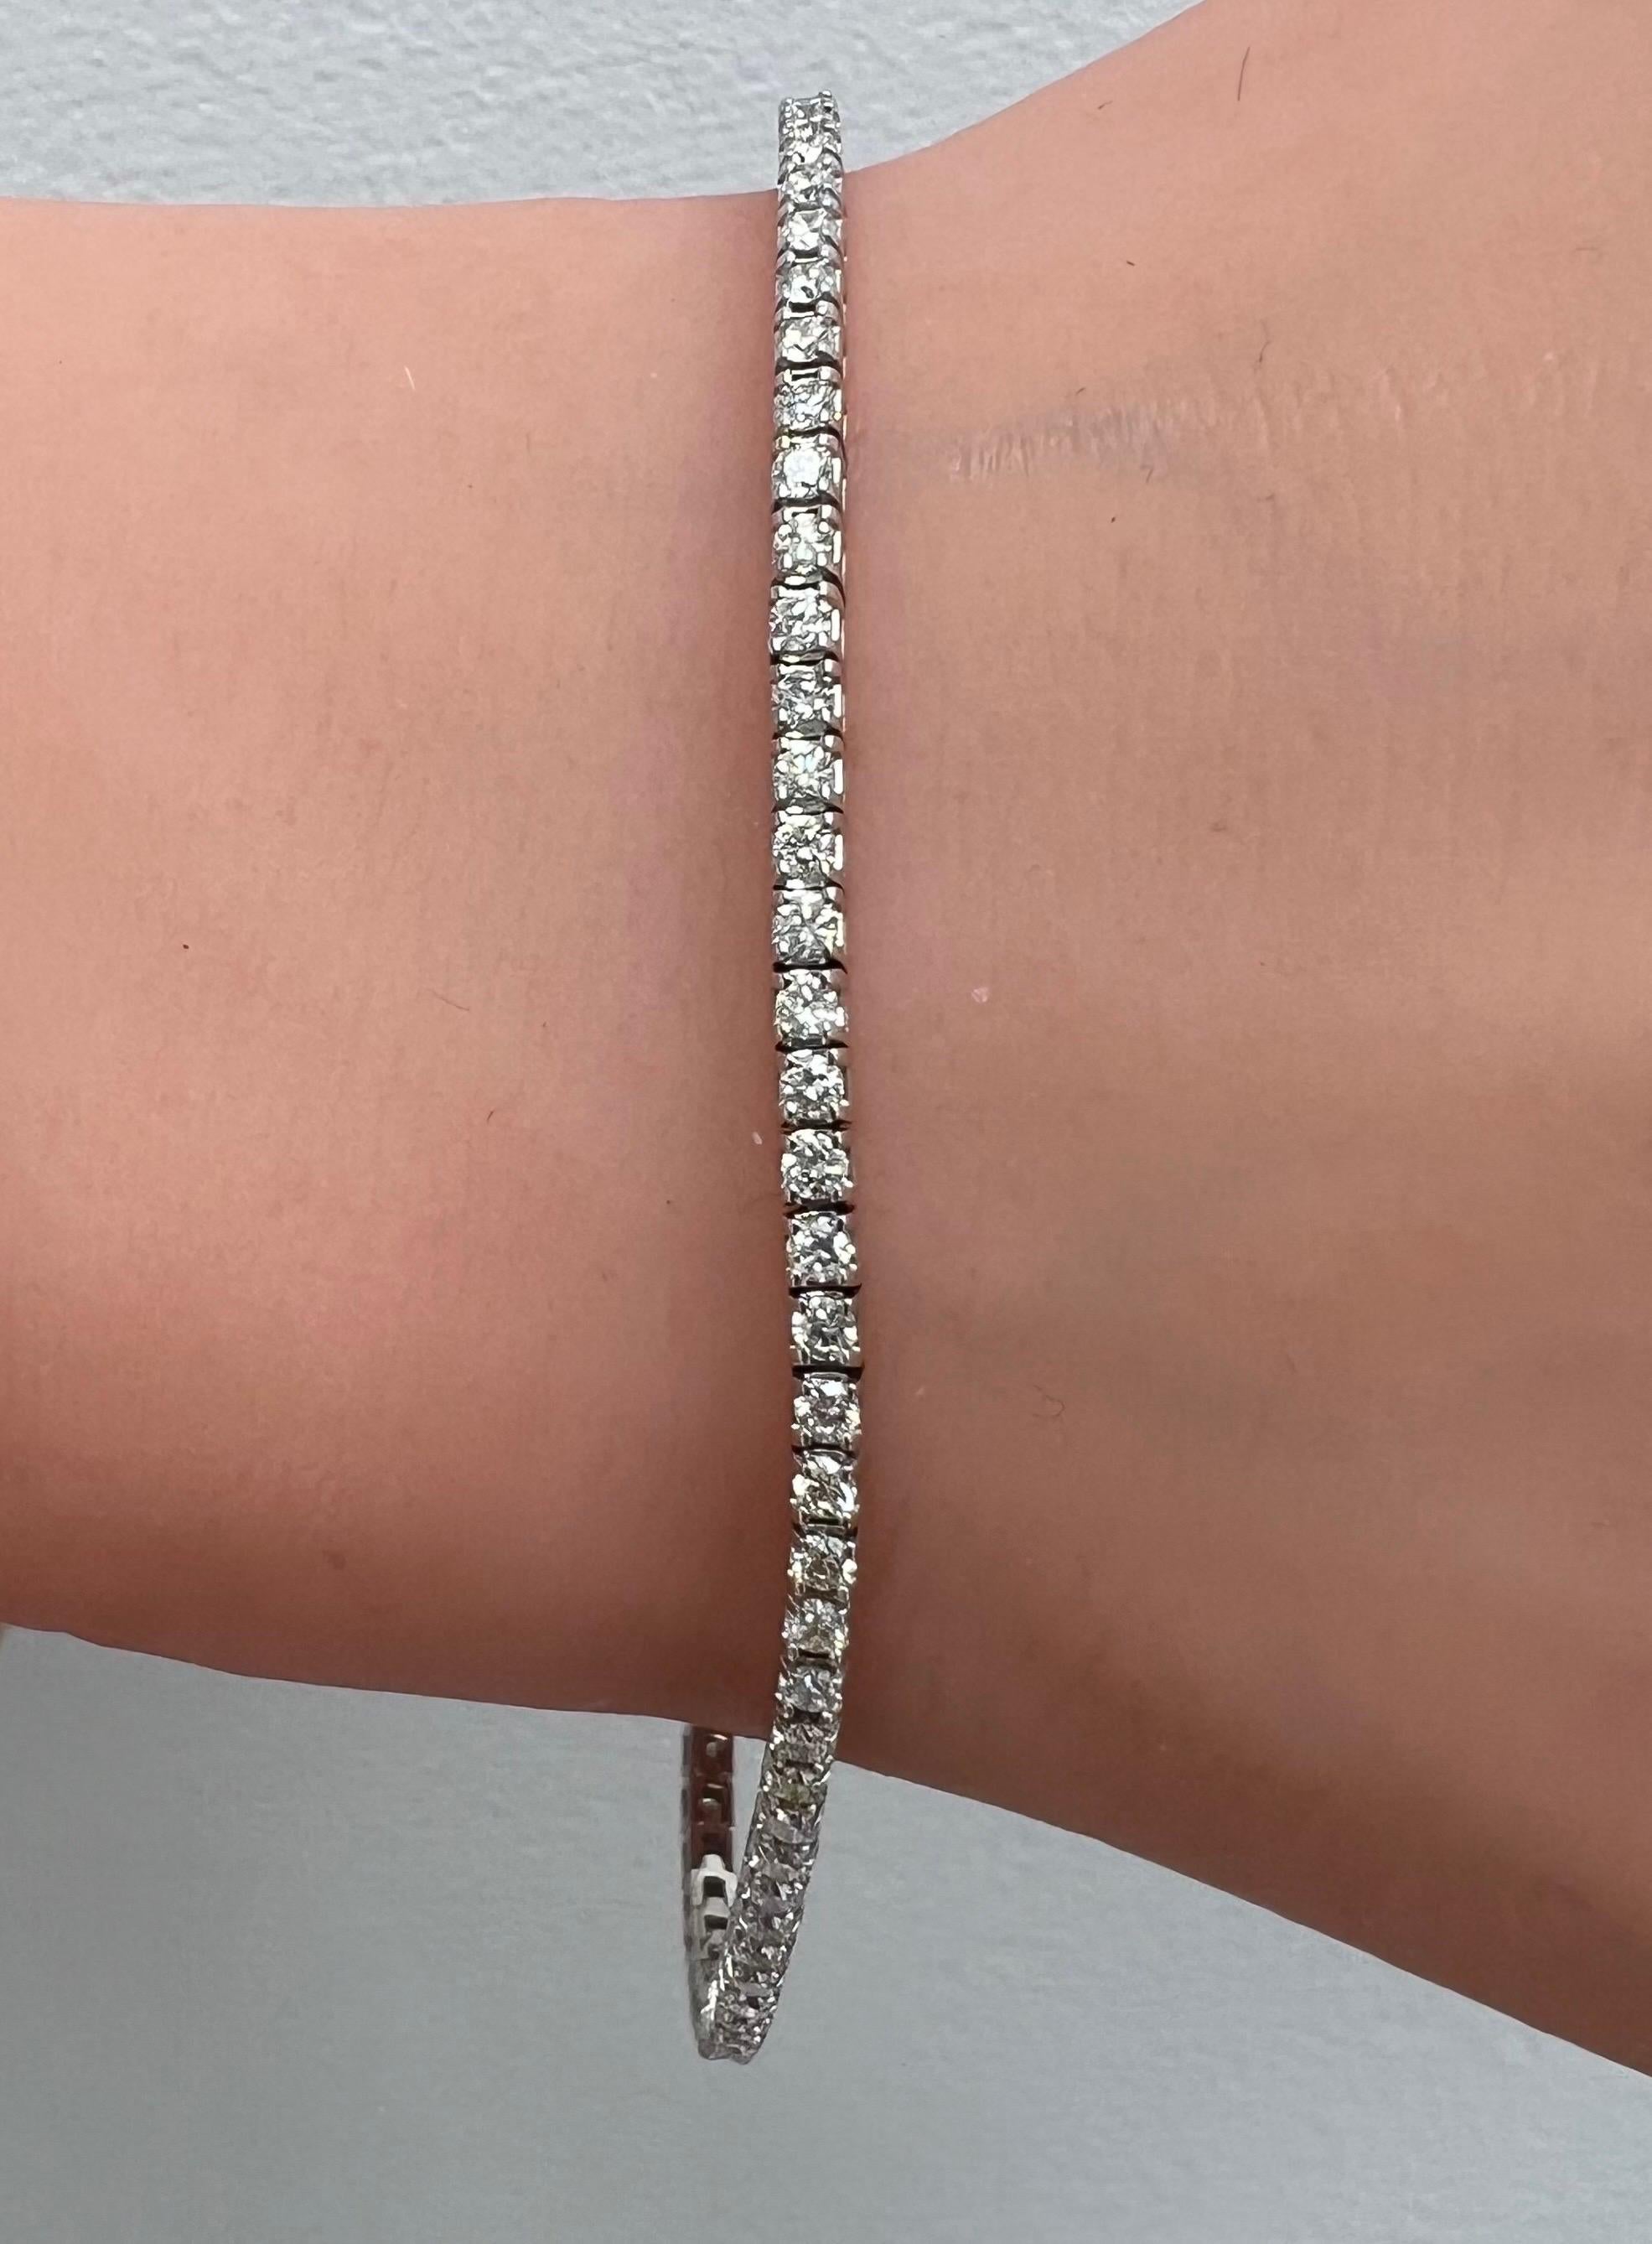 14k White Gold Tennis Bracelet with Natural Full Cut Diamonds- G/H Vs/Si1 - 2CT.
Classic for every occasion
Natural Full Cut Diamonds 
14k White Gold
4 prongs
Number of Diamonds: 79
Total Diamonds Weight: 2.00 Carats
Diamond’s Color: G/H
Diamond’s